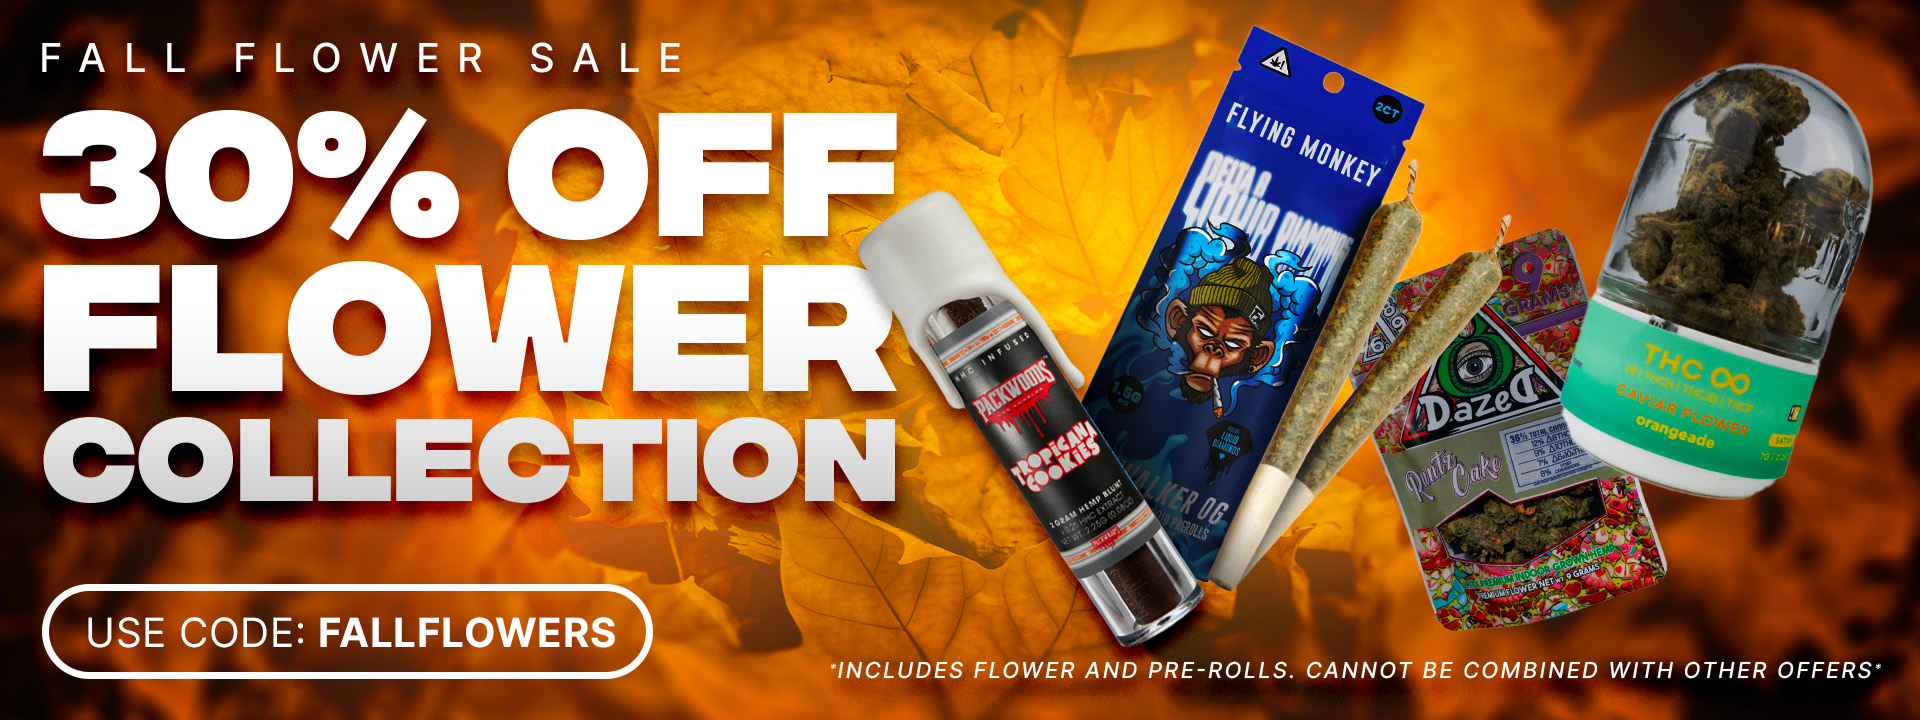 Use code FALLFLOWERS to get 30% OFF our flower collection